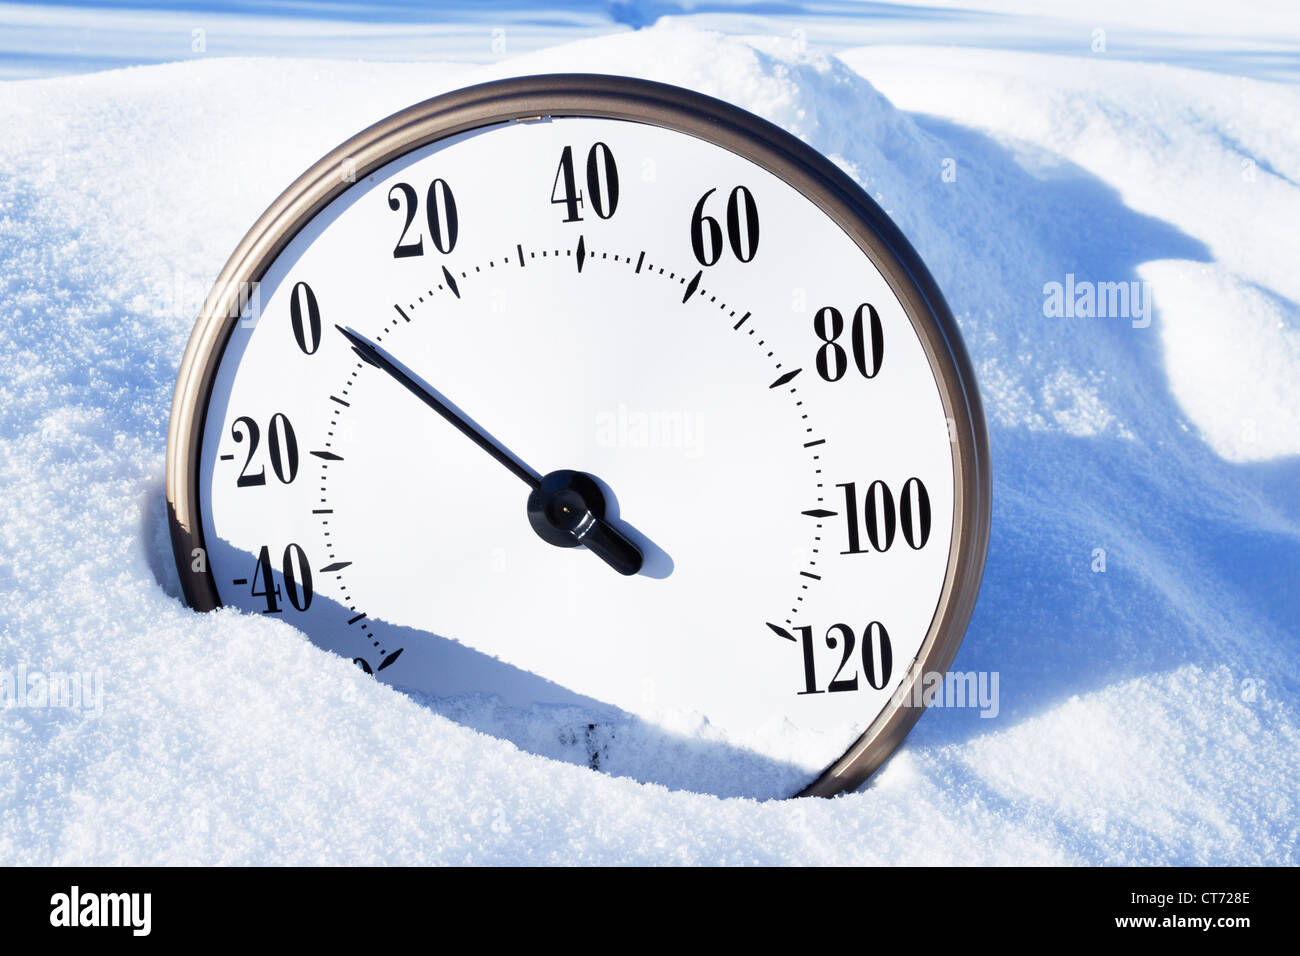 Temperature gauge in the snow showing slightly above zero degrees Fahrenheit. Stock Photo